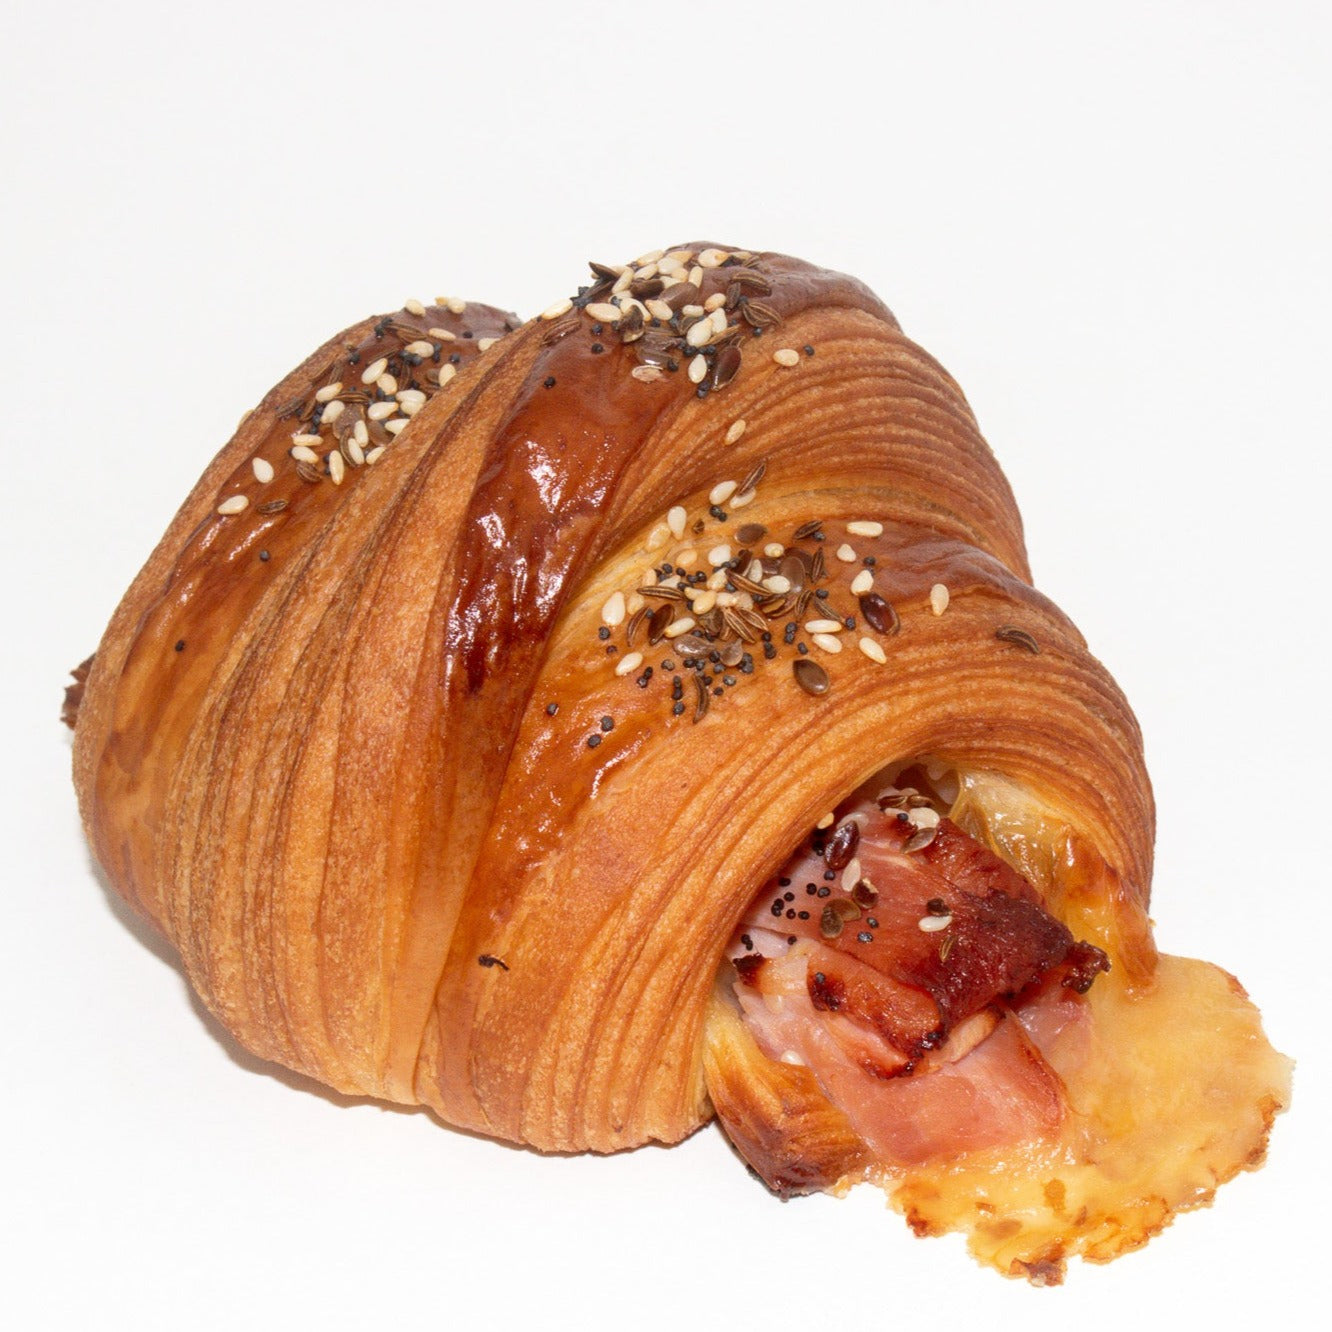 Image of croissant with ham and cheese in the middle, and seeds on the top